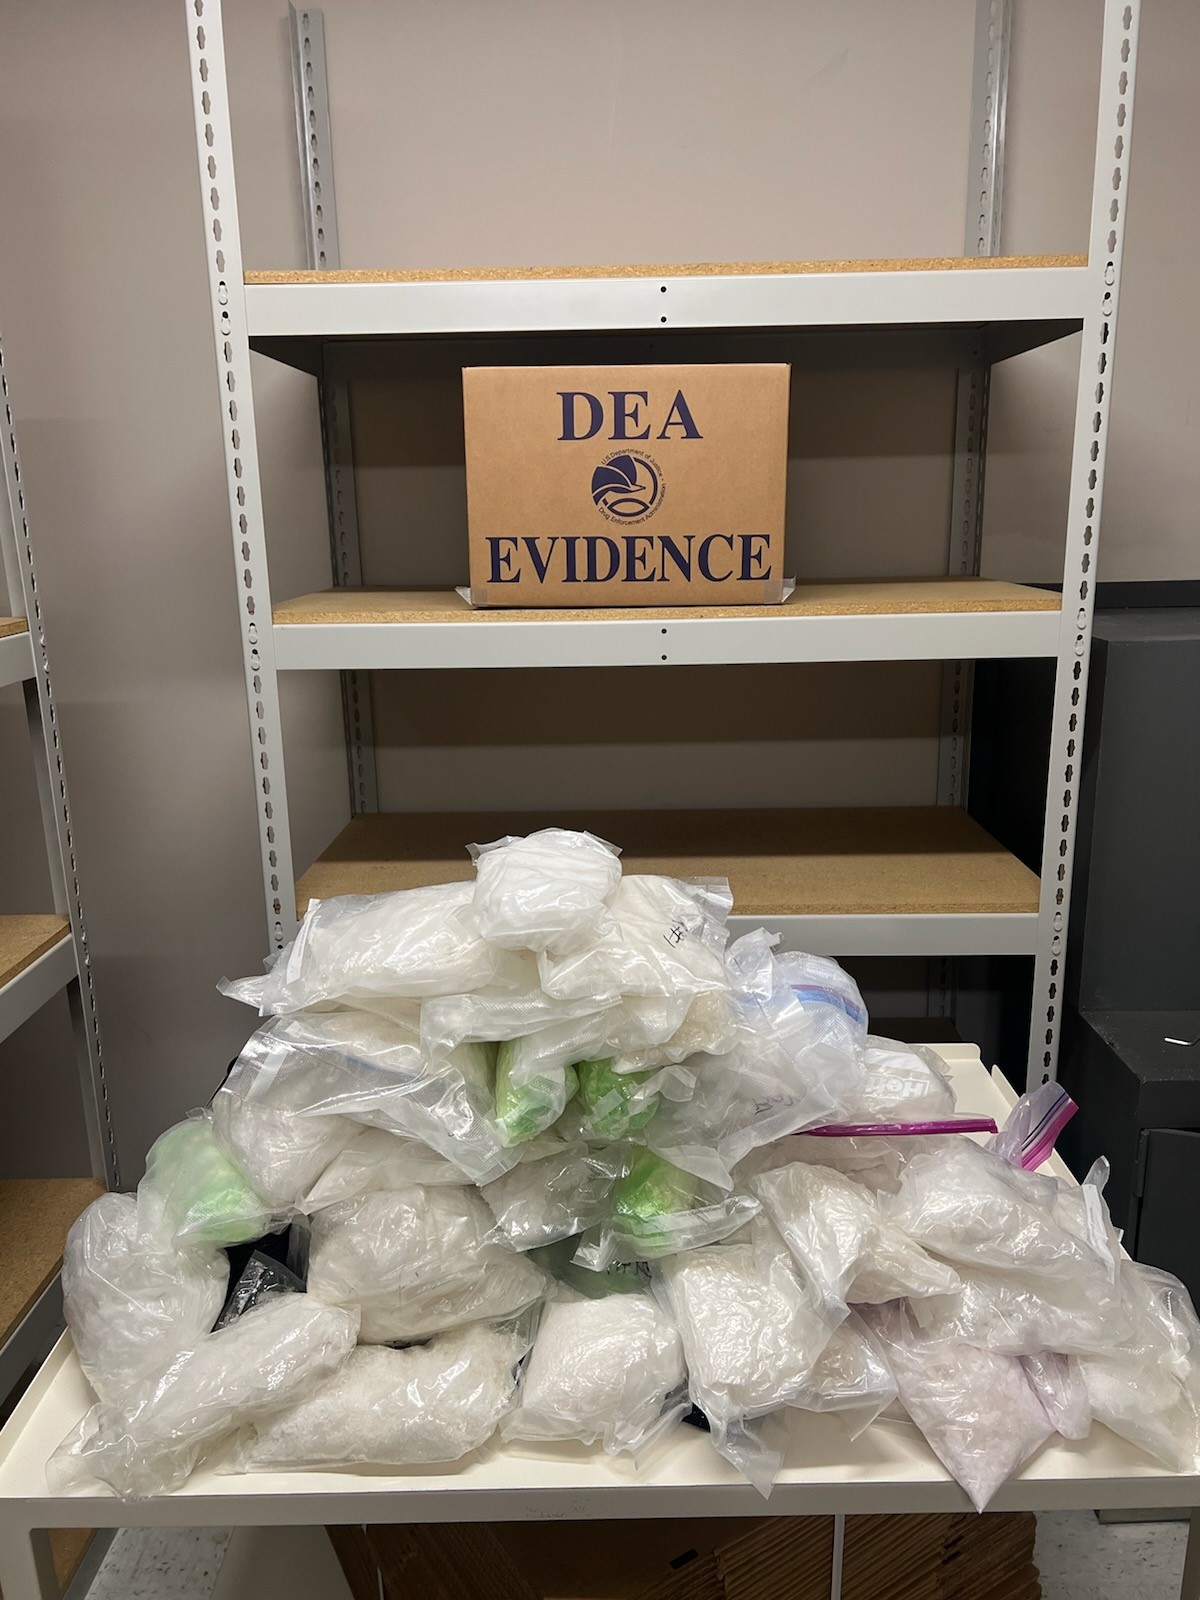 WCSO investigation nets 59 pounds of meth and 2 arrests